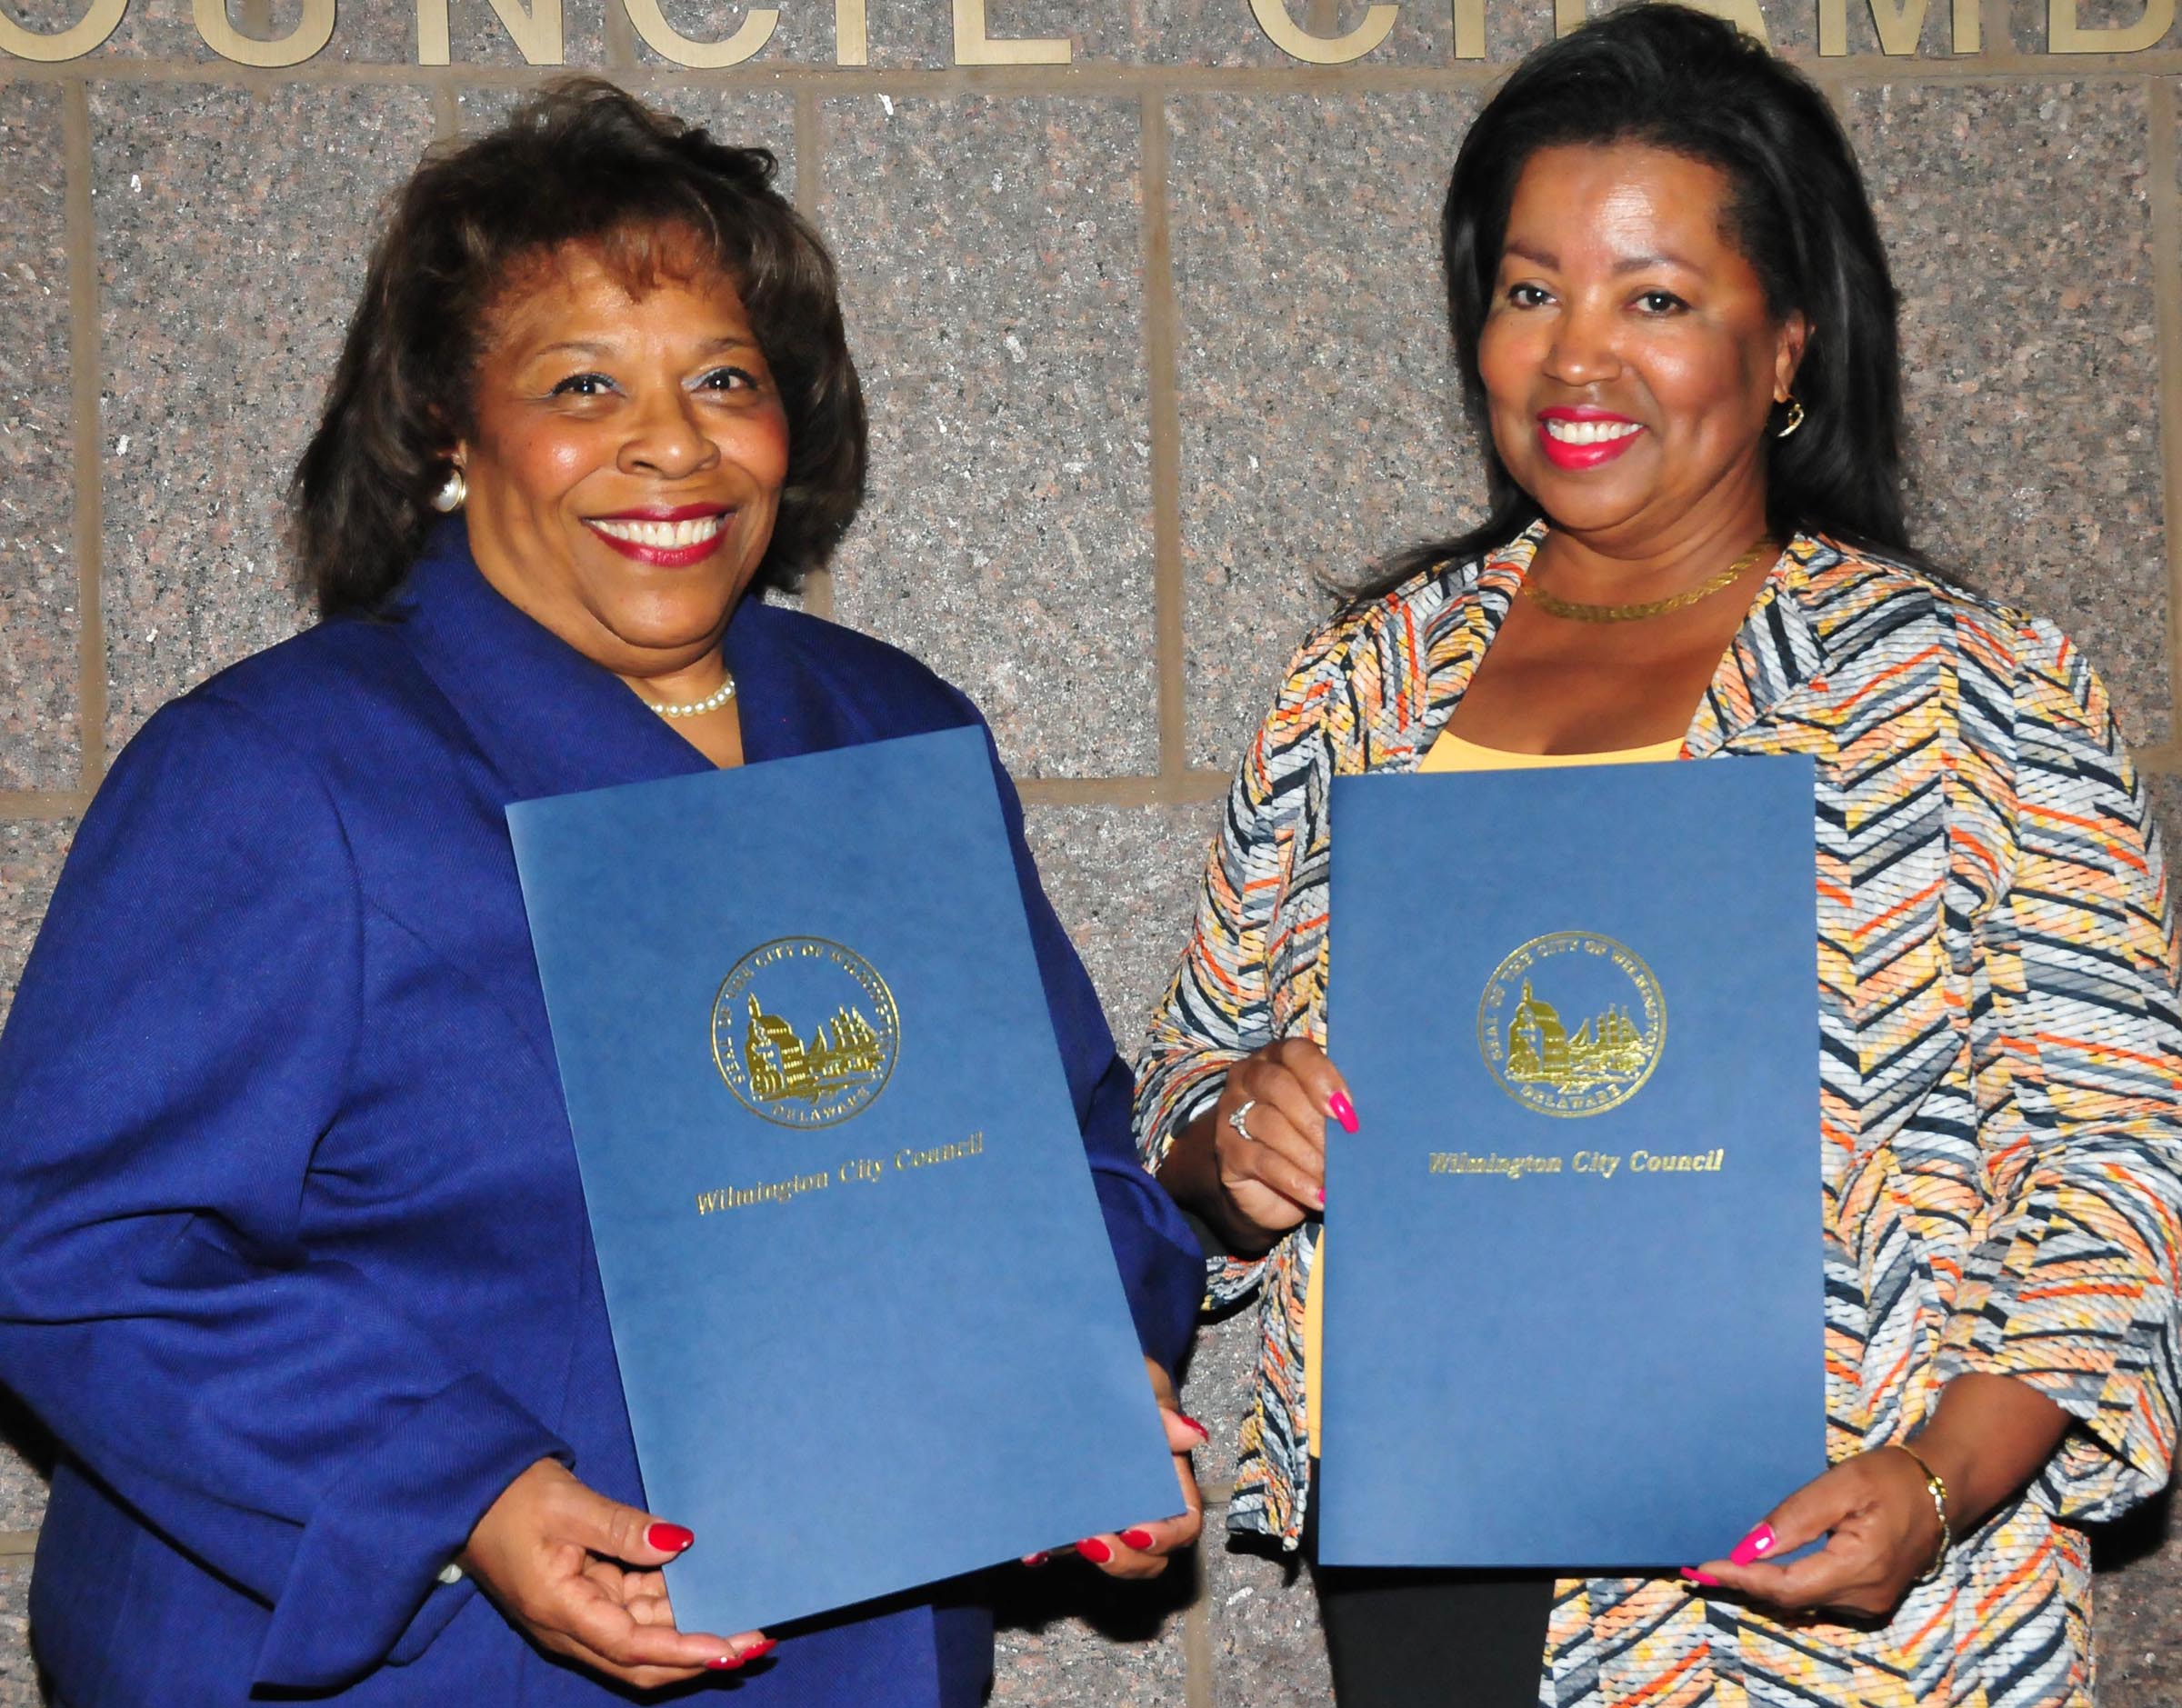 DSU Board Chair Wilma Mishoe and Vice Chair Devona Williams hold resolution presented to them by the Wilmington City Council